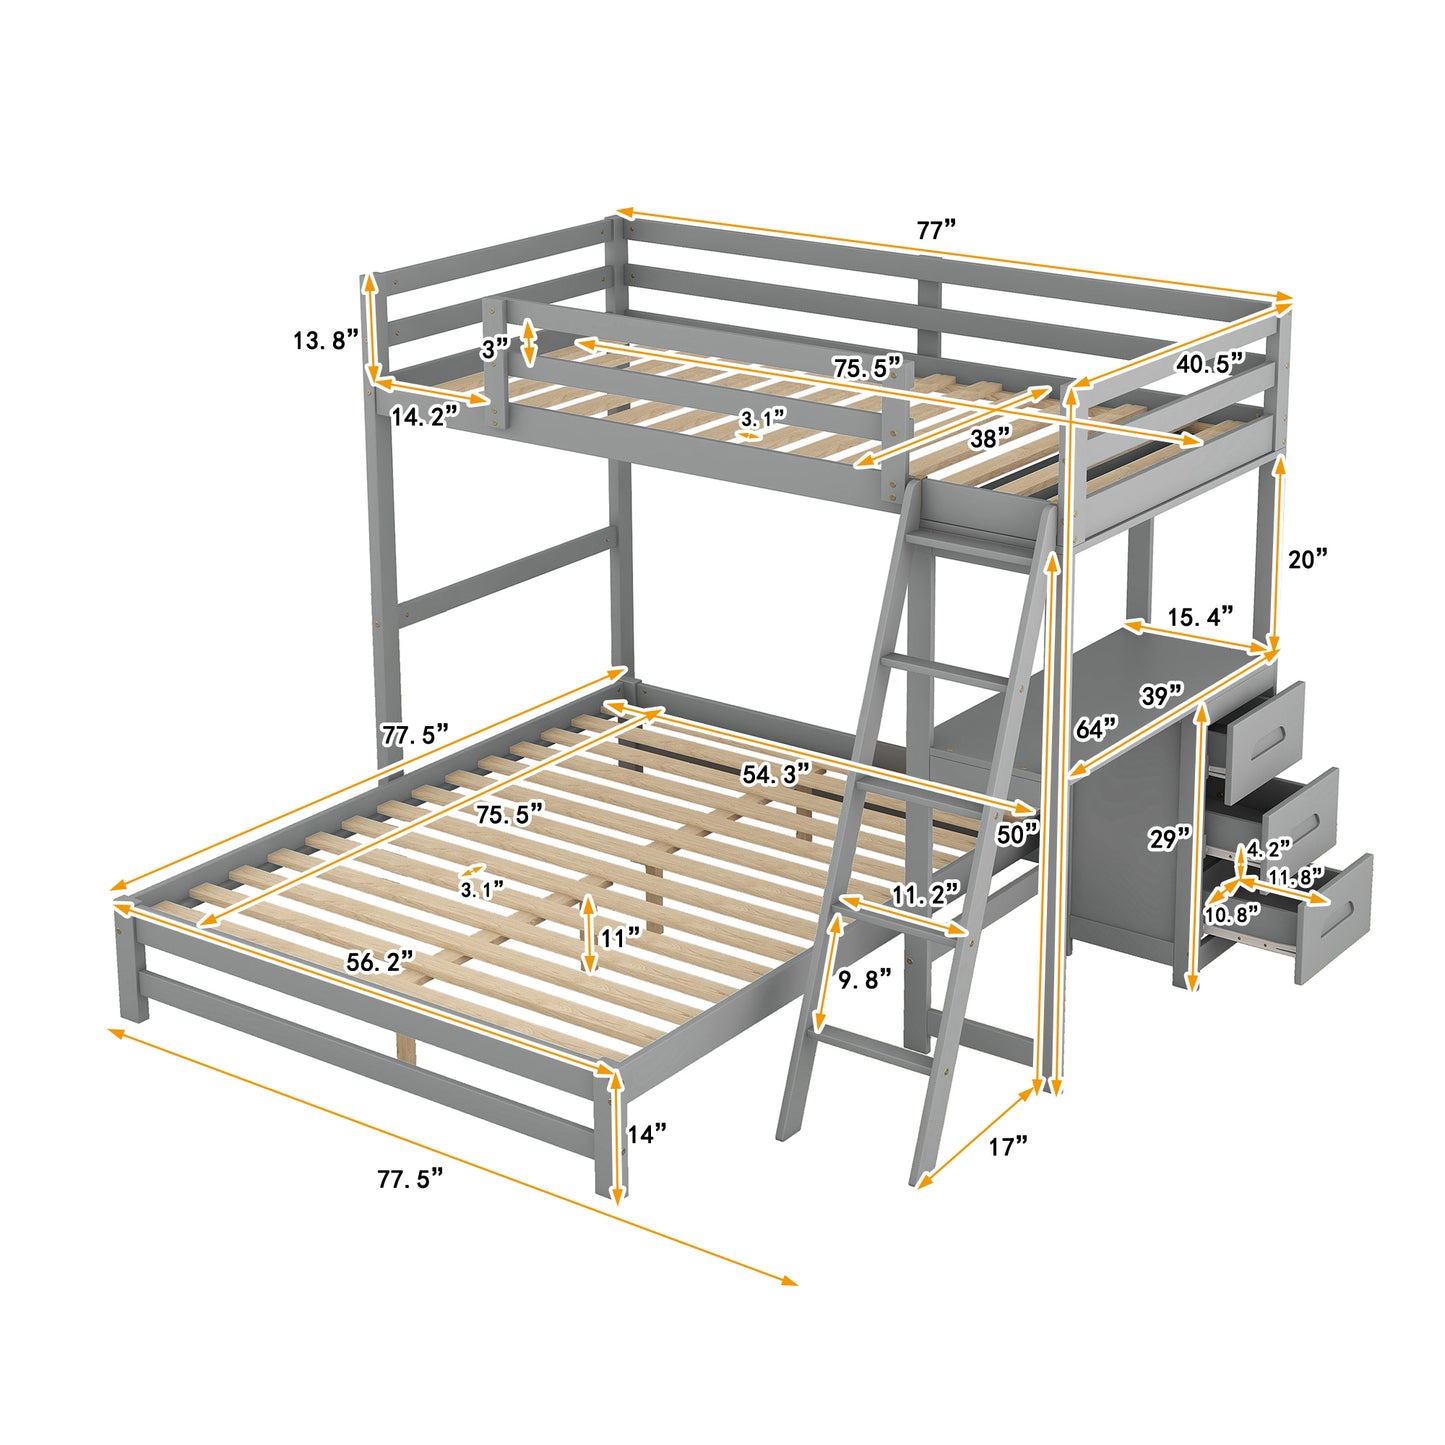 Twin over Full Bunk Bed with Built-in Desk and Three Drawers, Grey